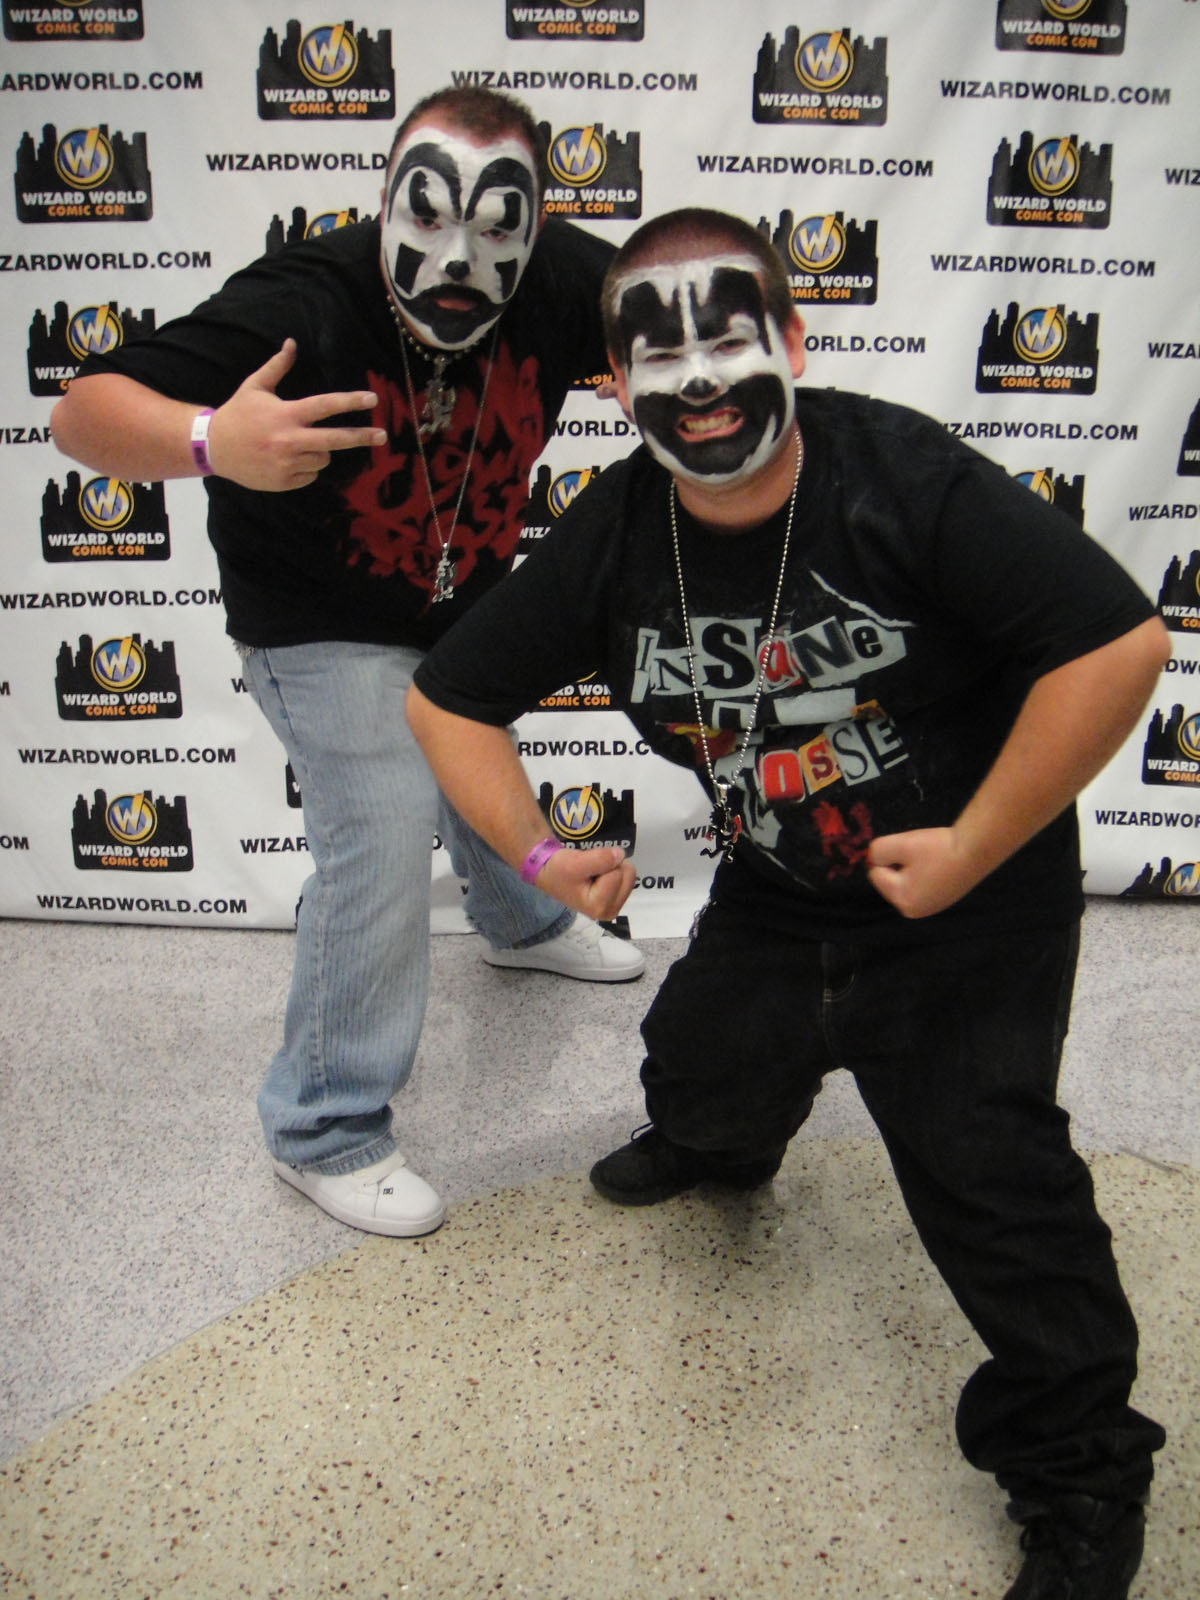 JuggalosBy The Conmunity - Pop Culture Geek from Los Angeles, CA, USA (Wizard World Anaheim 2011 - Insane Clown Posse) [CC BY 2.0 (https://creativecommons.org/licenses/by/2.0)], via Wikimedia Commons